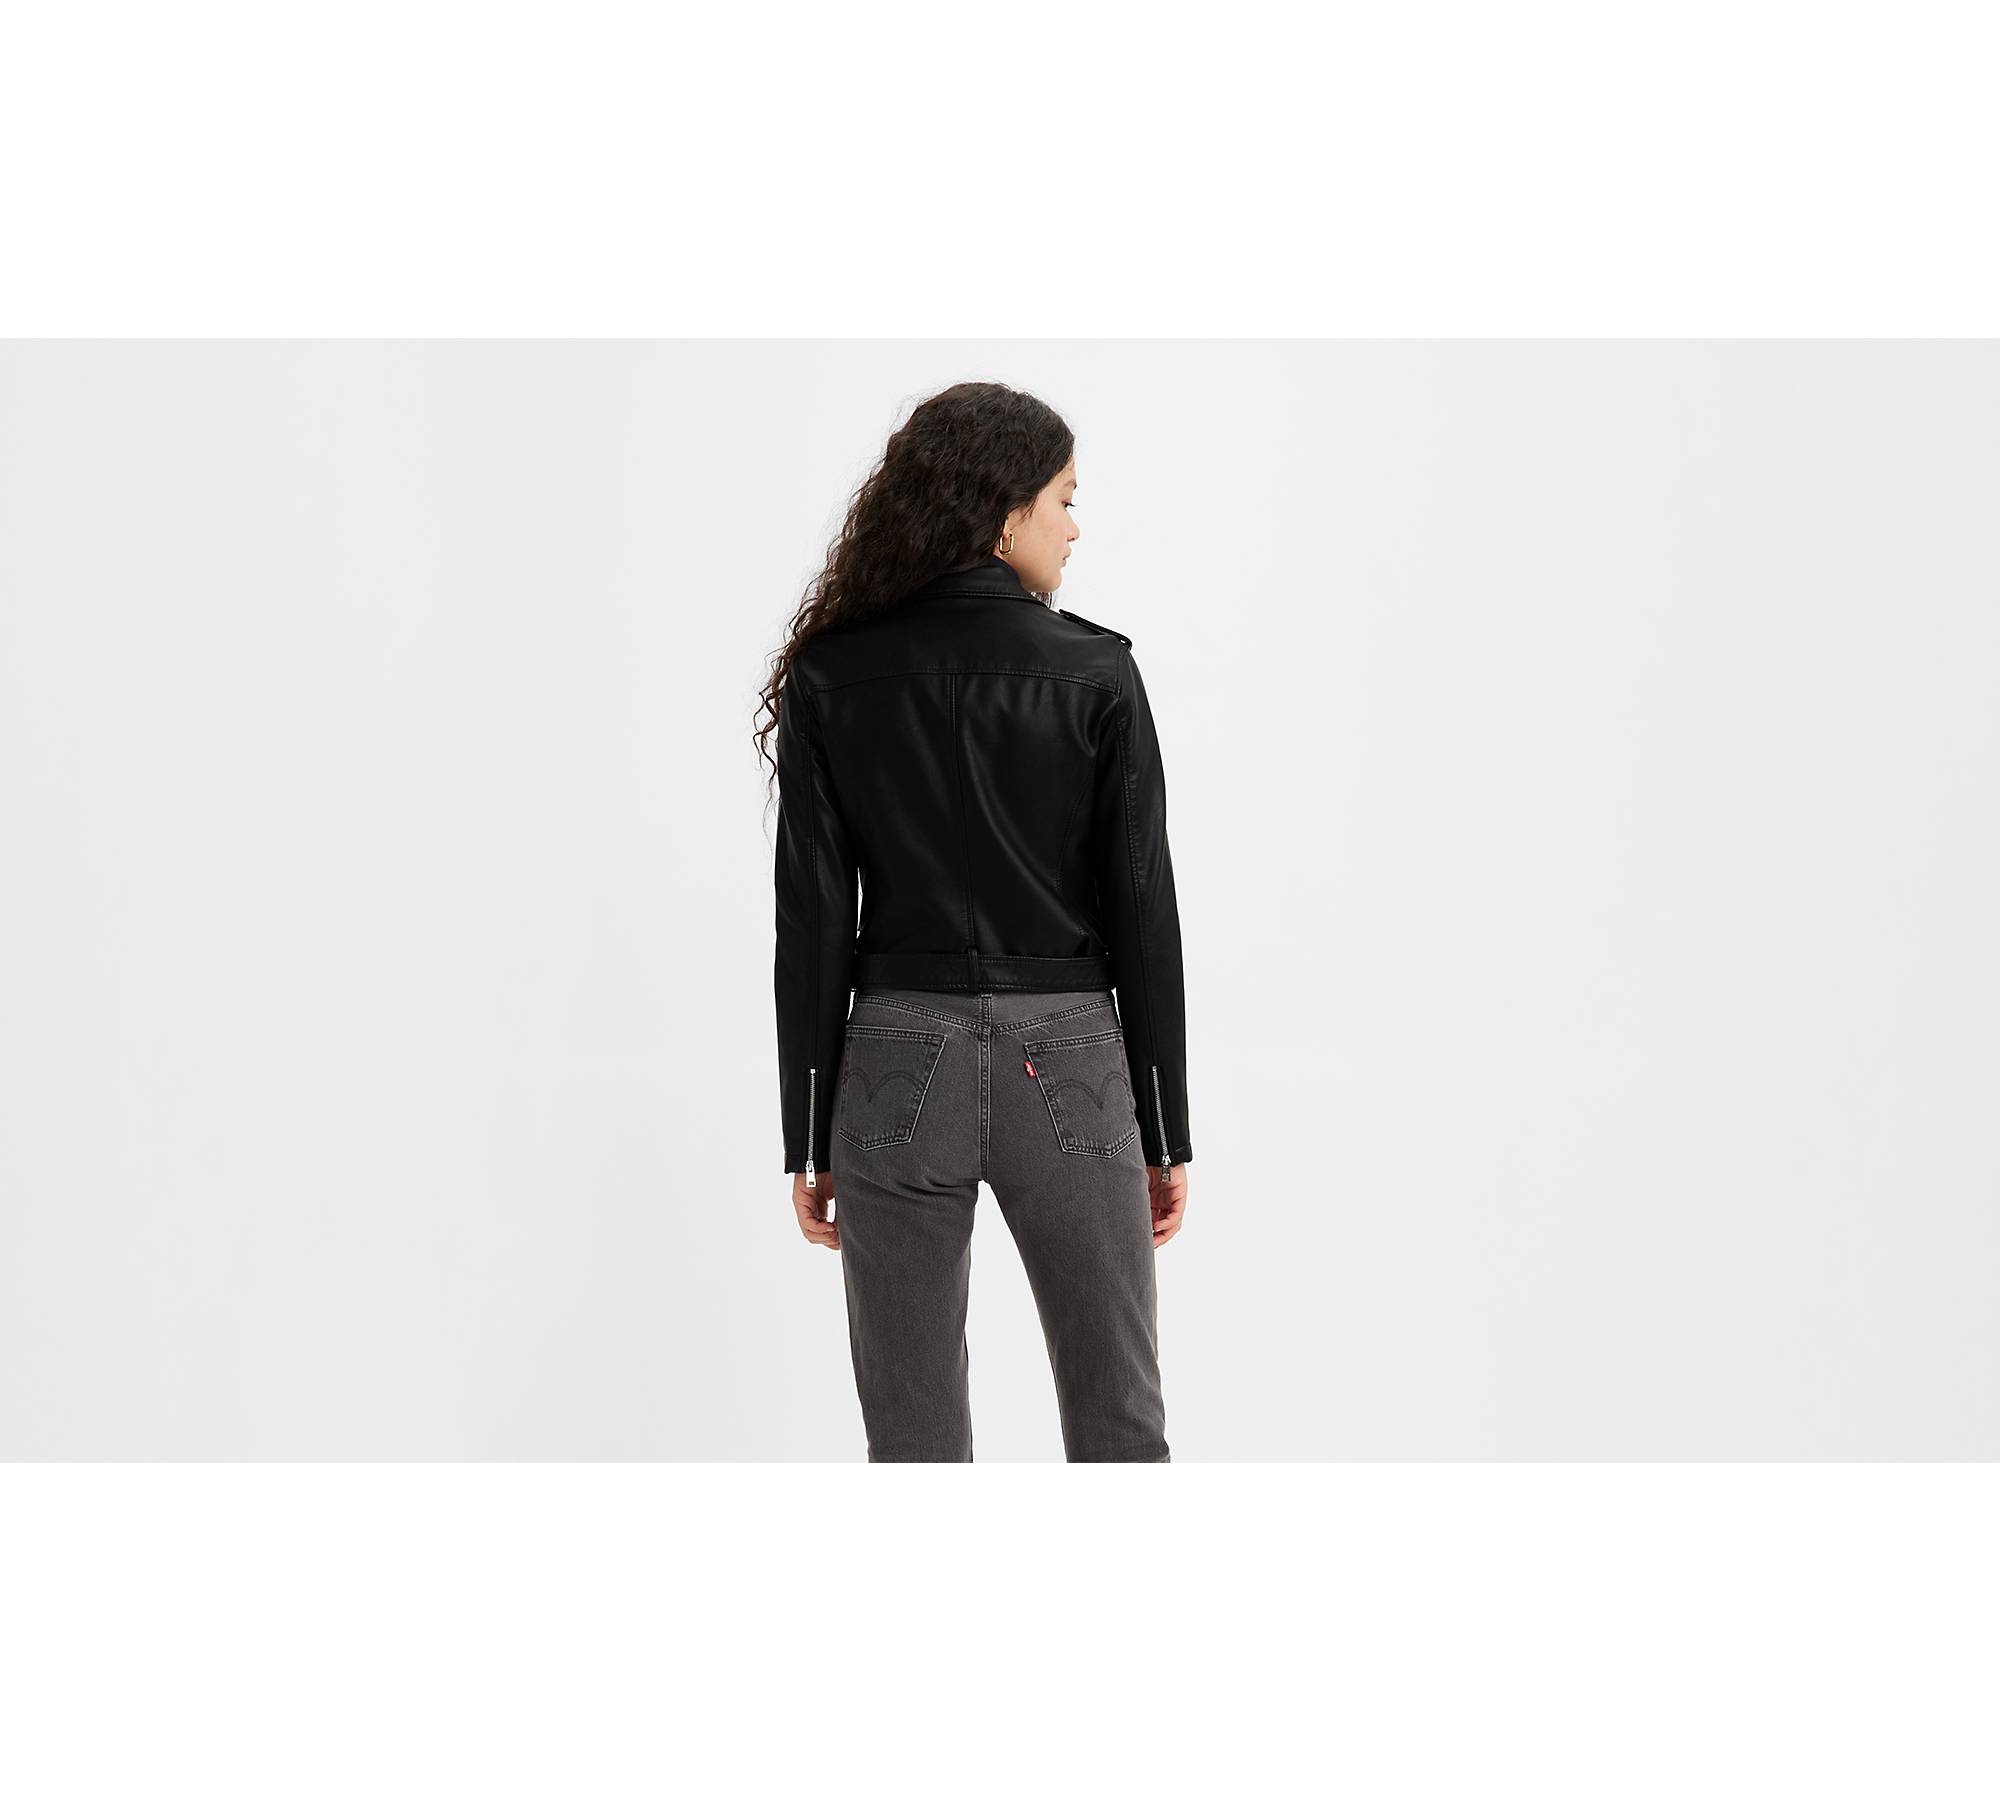 Womens Motorcycle Jacket: Academia Style Faux Leather Jacket In Black/Red S  5XL From Herish, $28.28